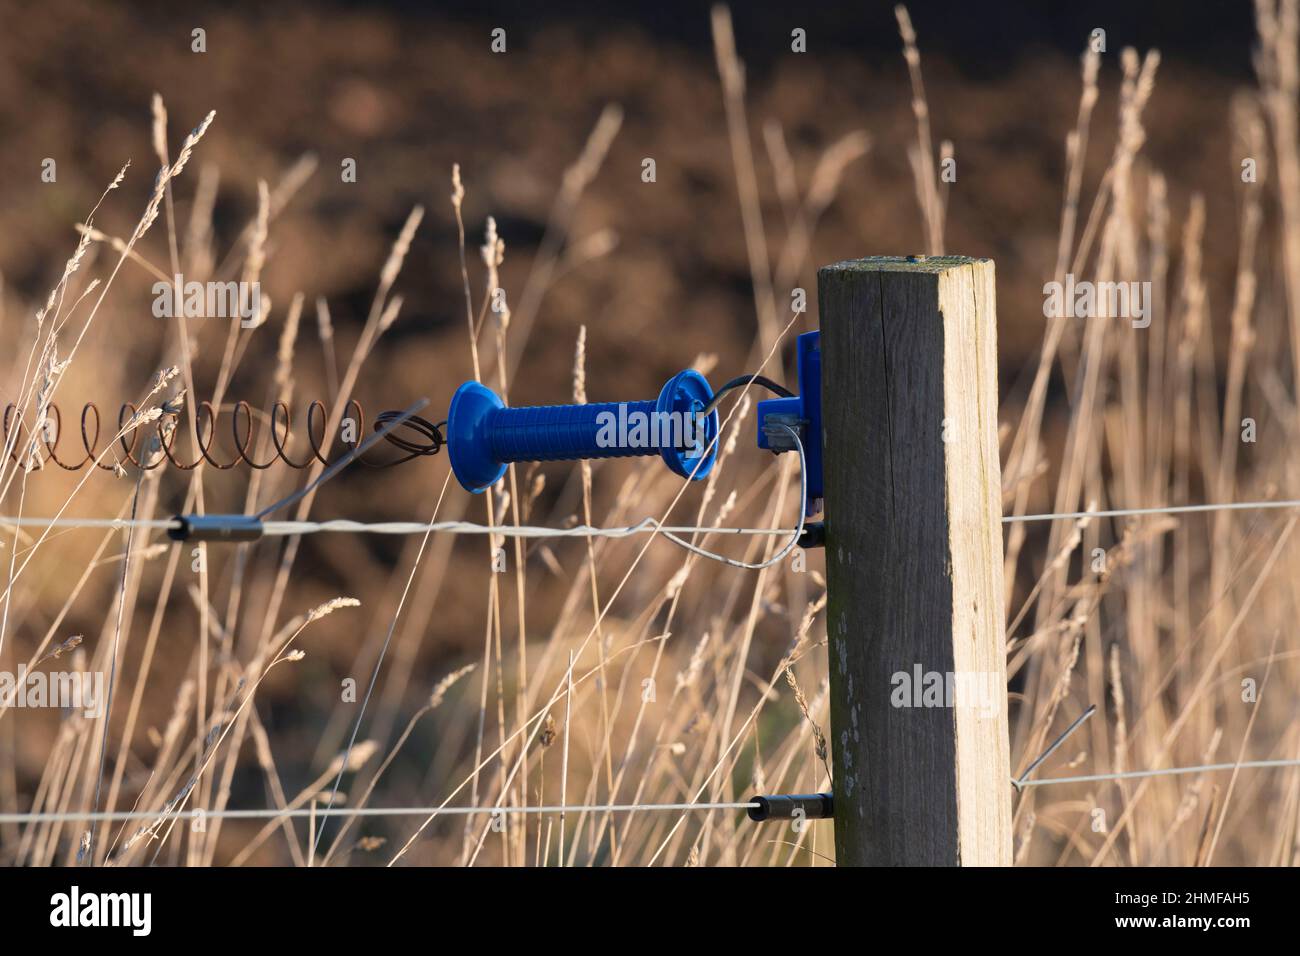 A Blue Insulating Handle on a Spring Gate Connected to an Electric Fence at the Edge of a Field Stock Photo